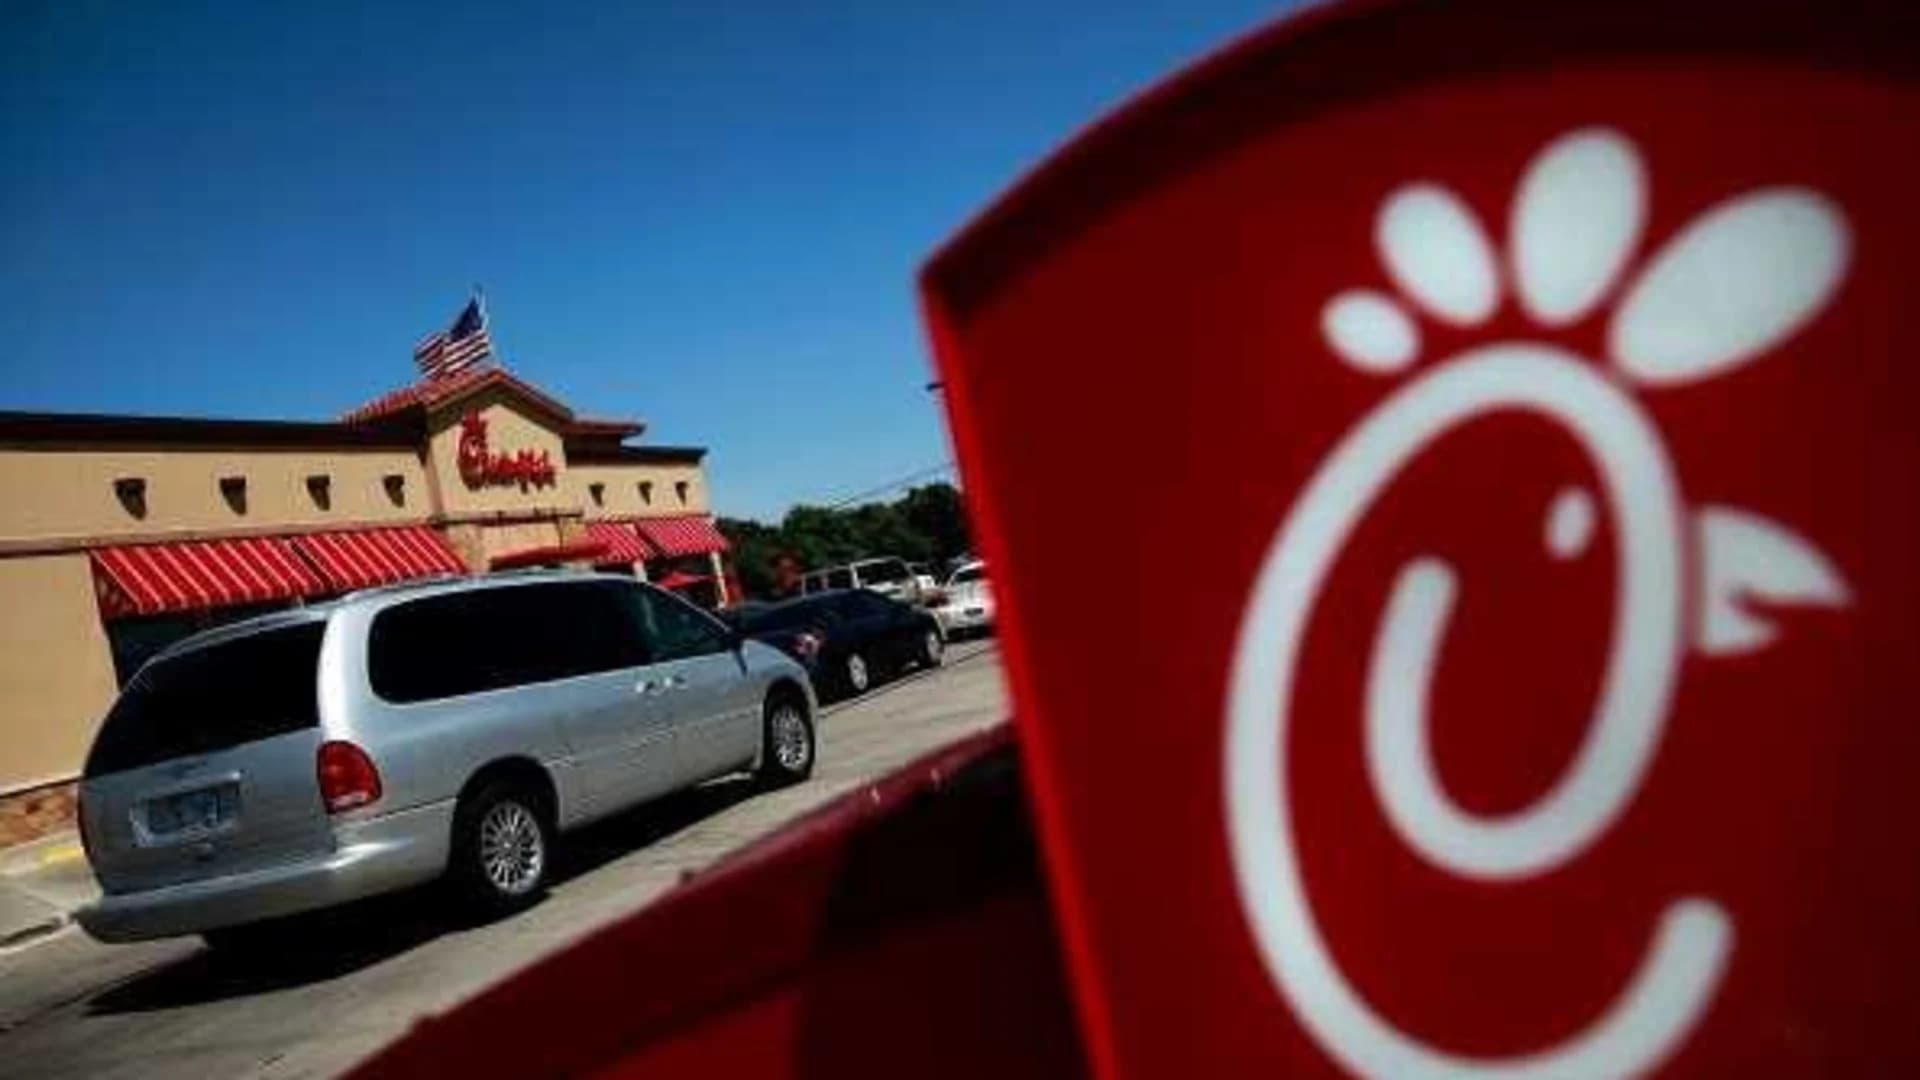 Chick-fil-A partners with DoorDash for home delivery